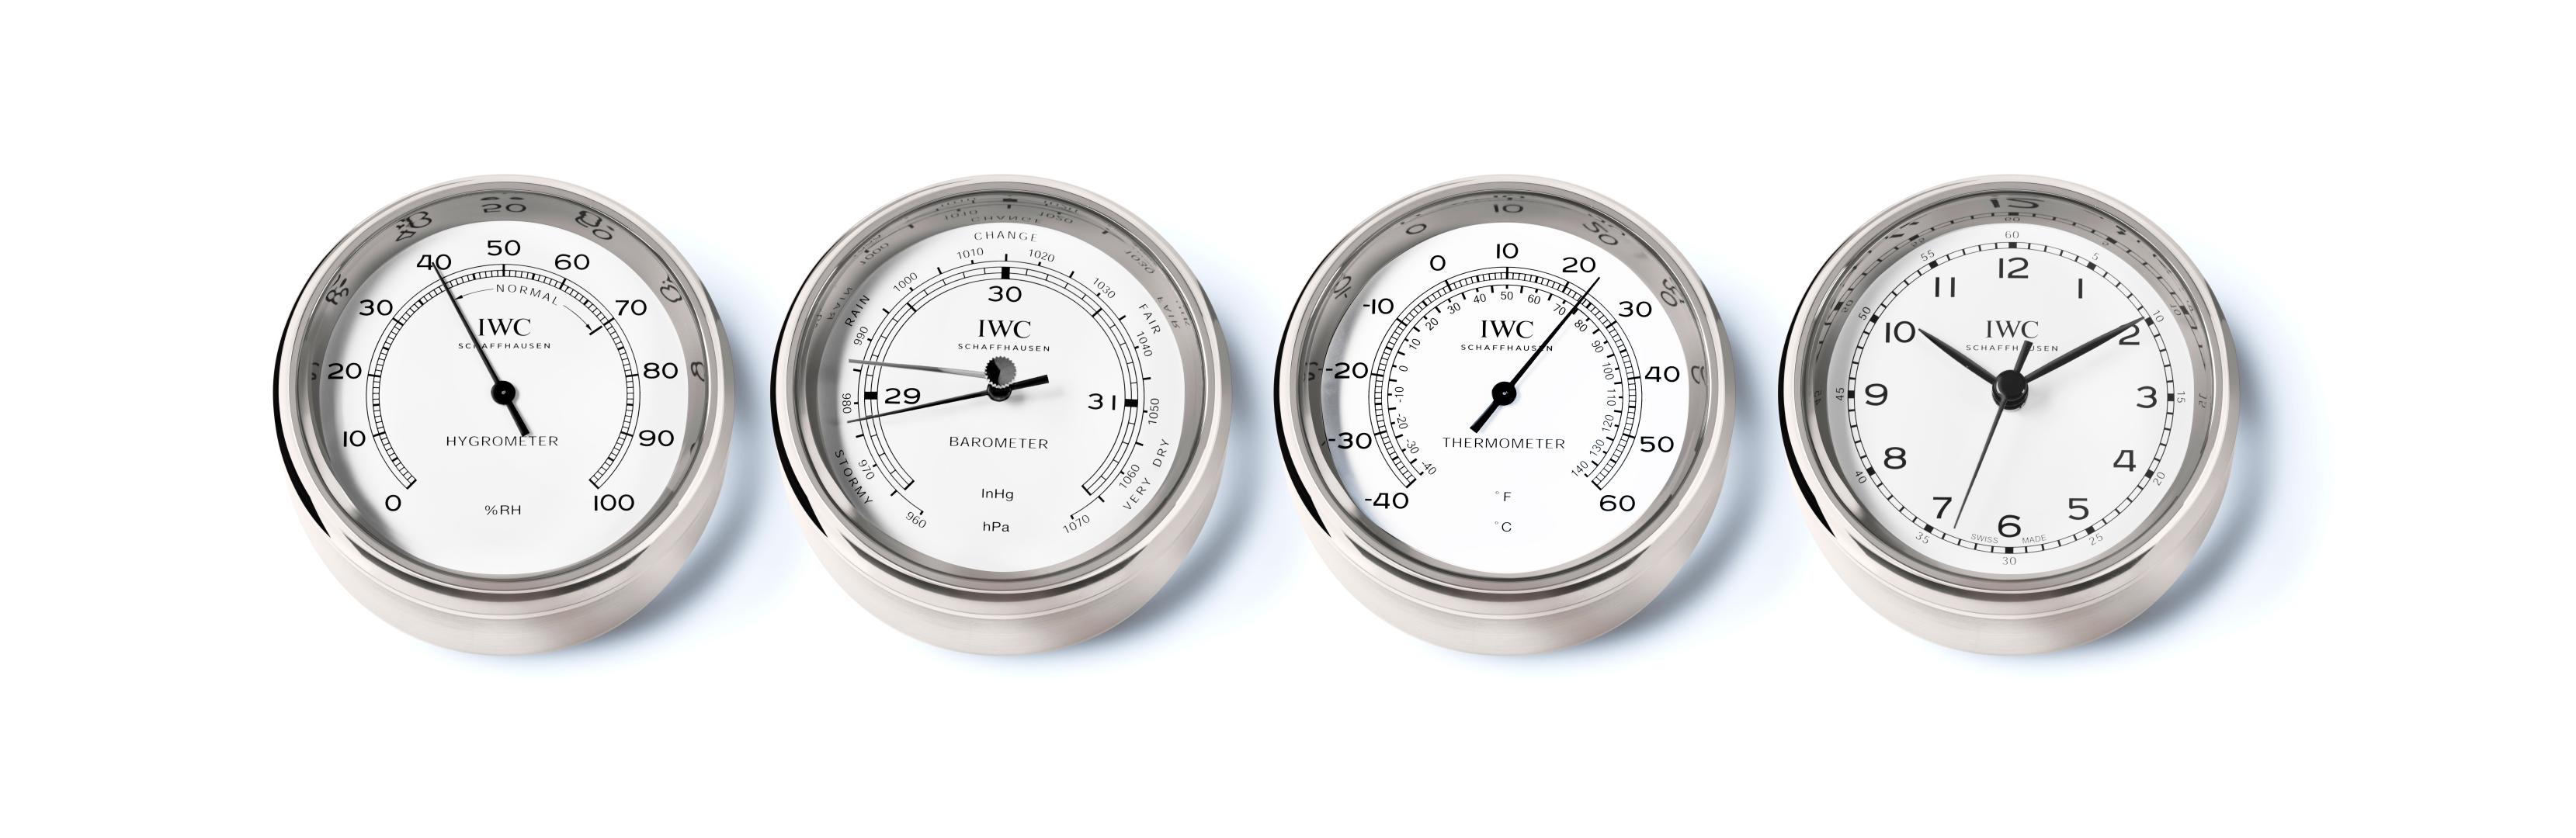 IWC Instruments for Solaris Yachts